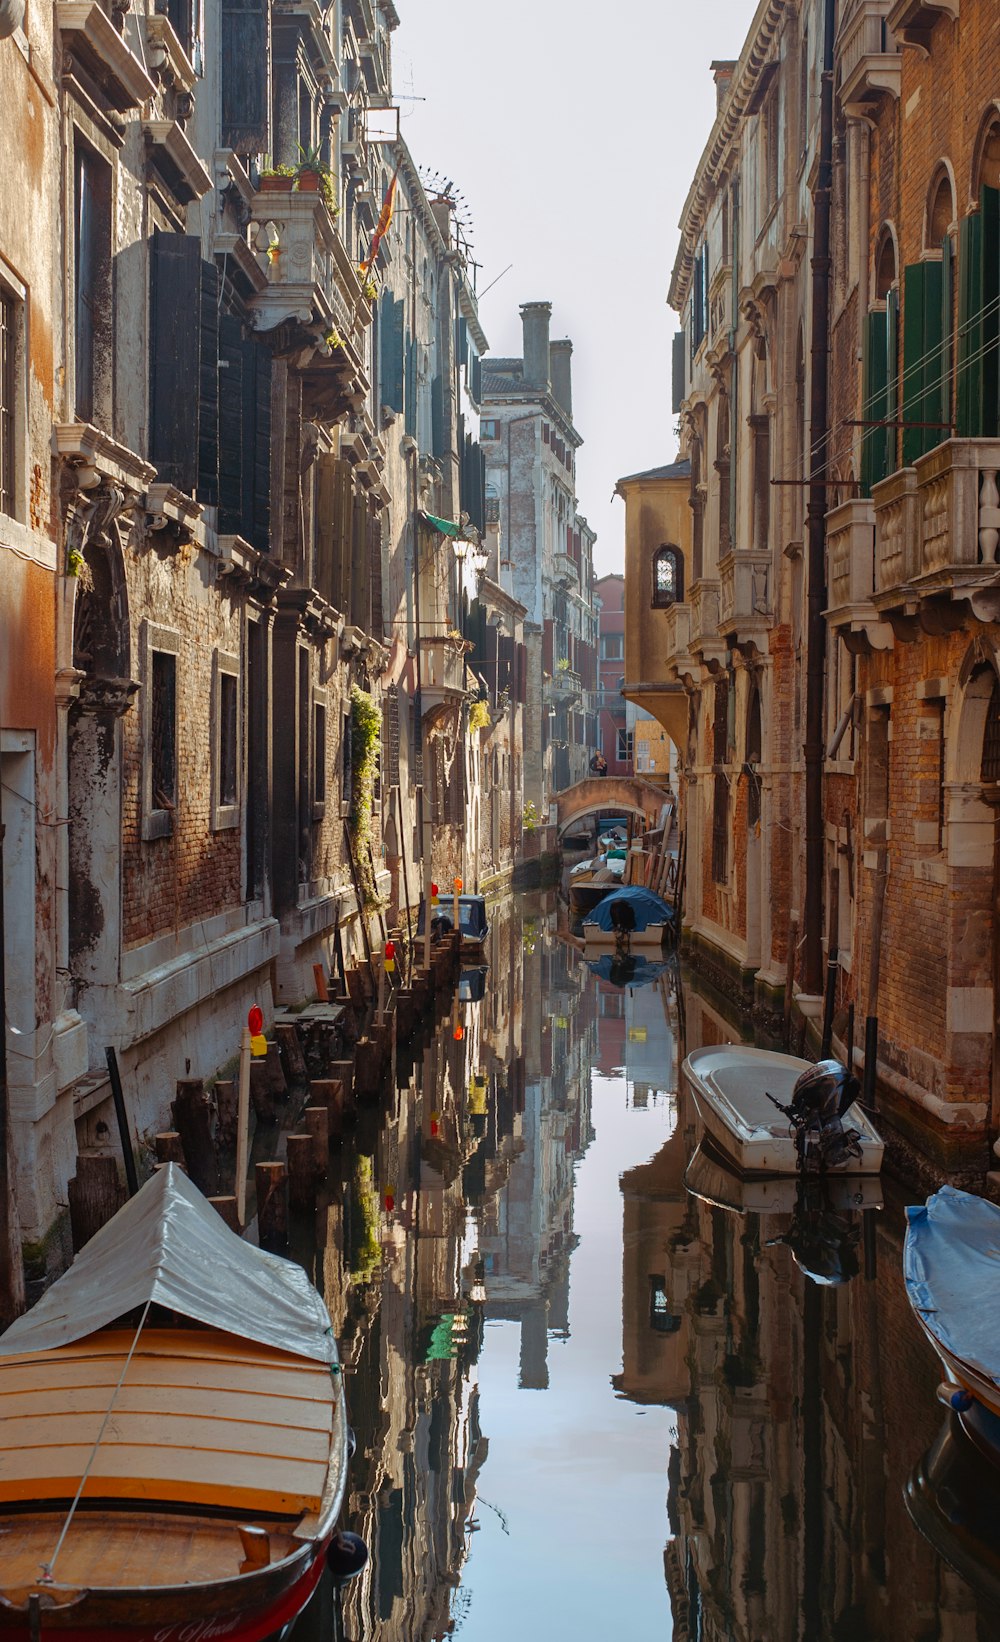 a narrow canal in a city with buildings and boats